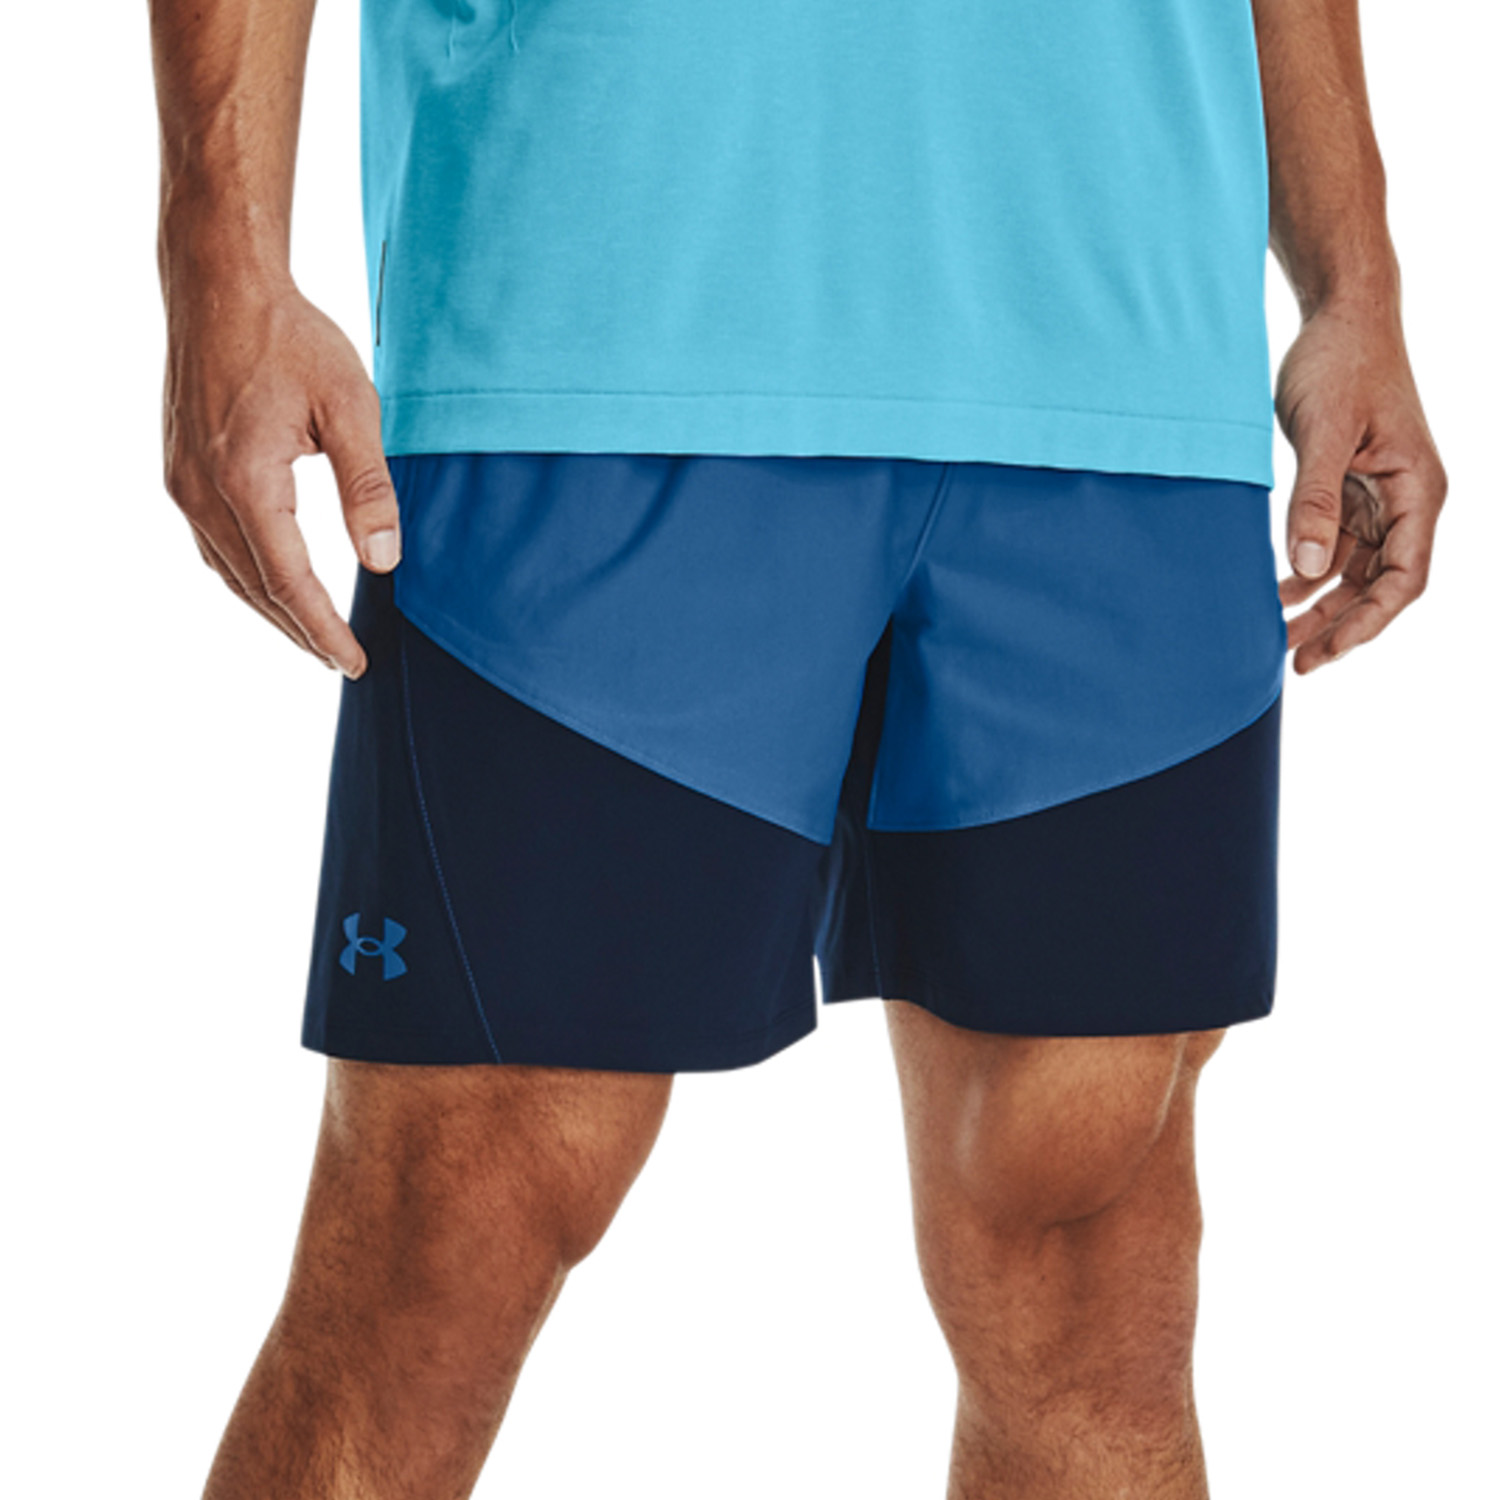 Under Armour Knit Woven Shorts Tenis Hombre - Cruise Blue